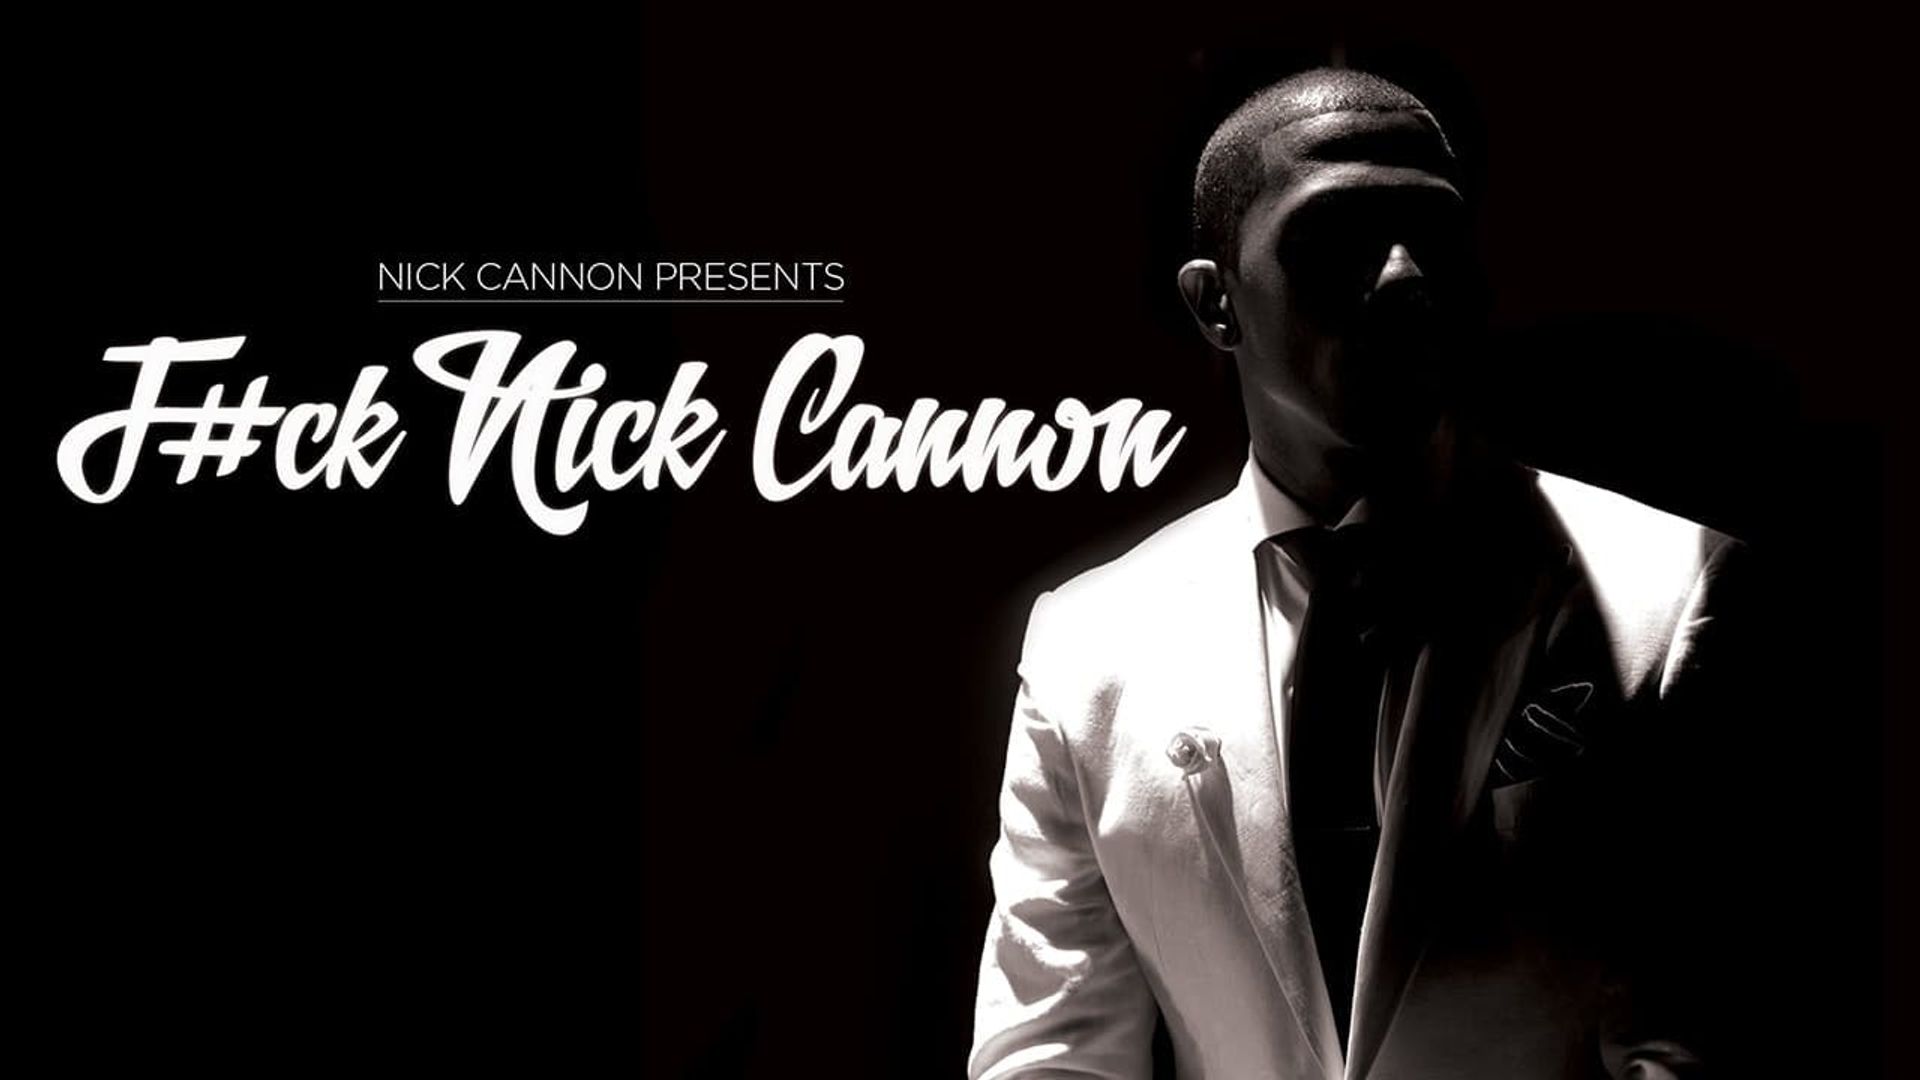 Nick Cannon: F#Ck Nick Cannon background